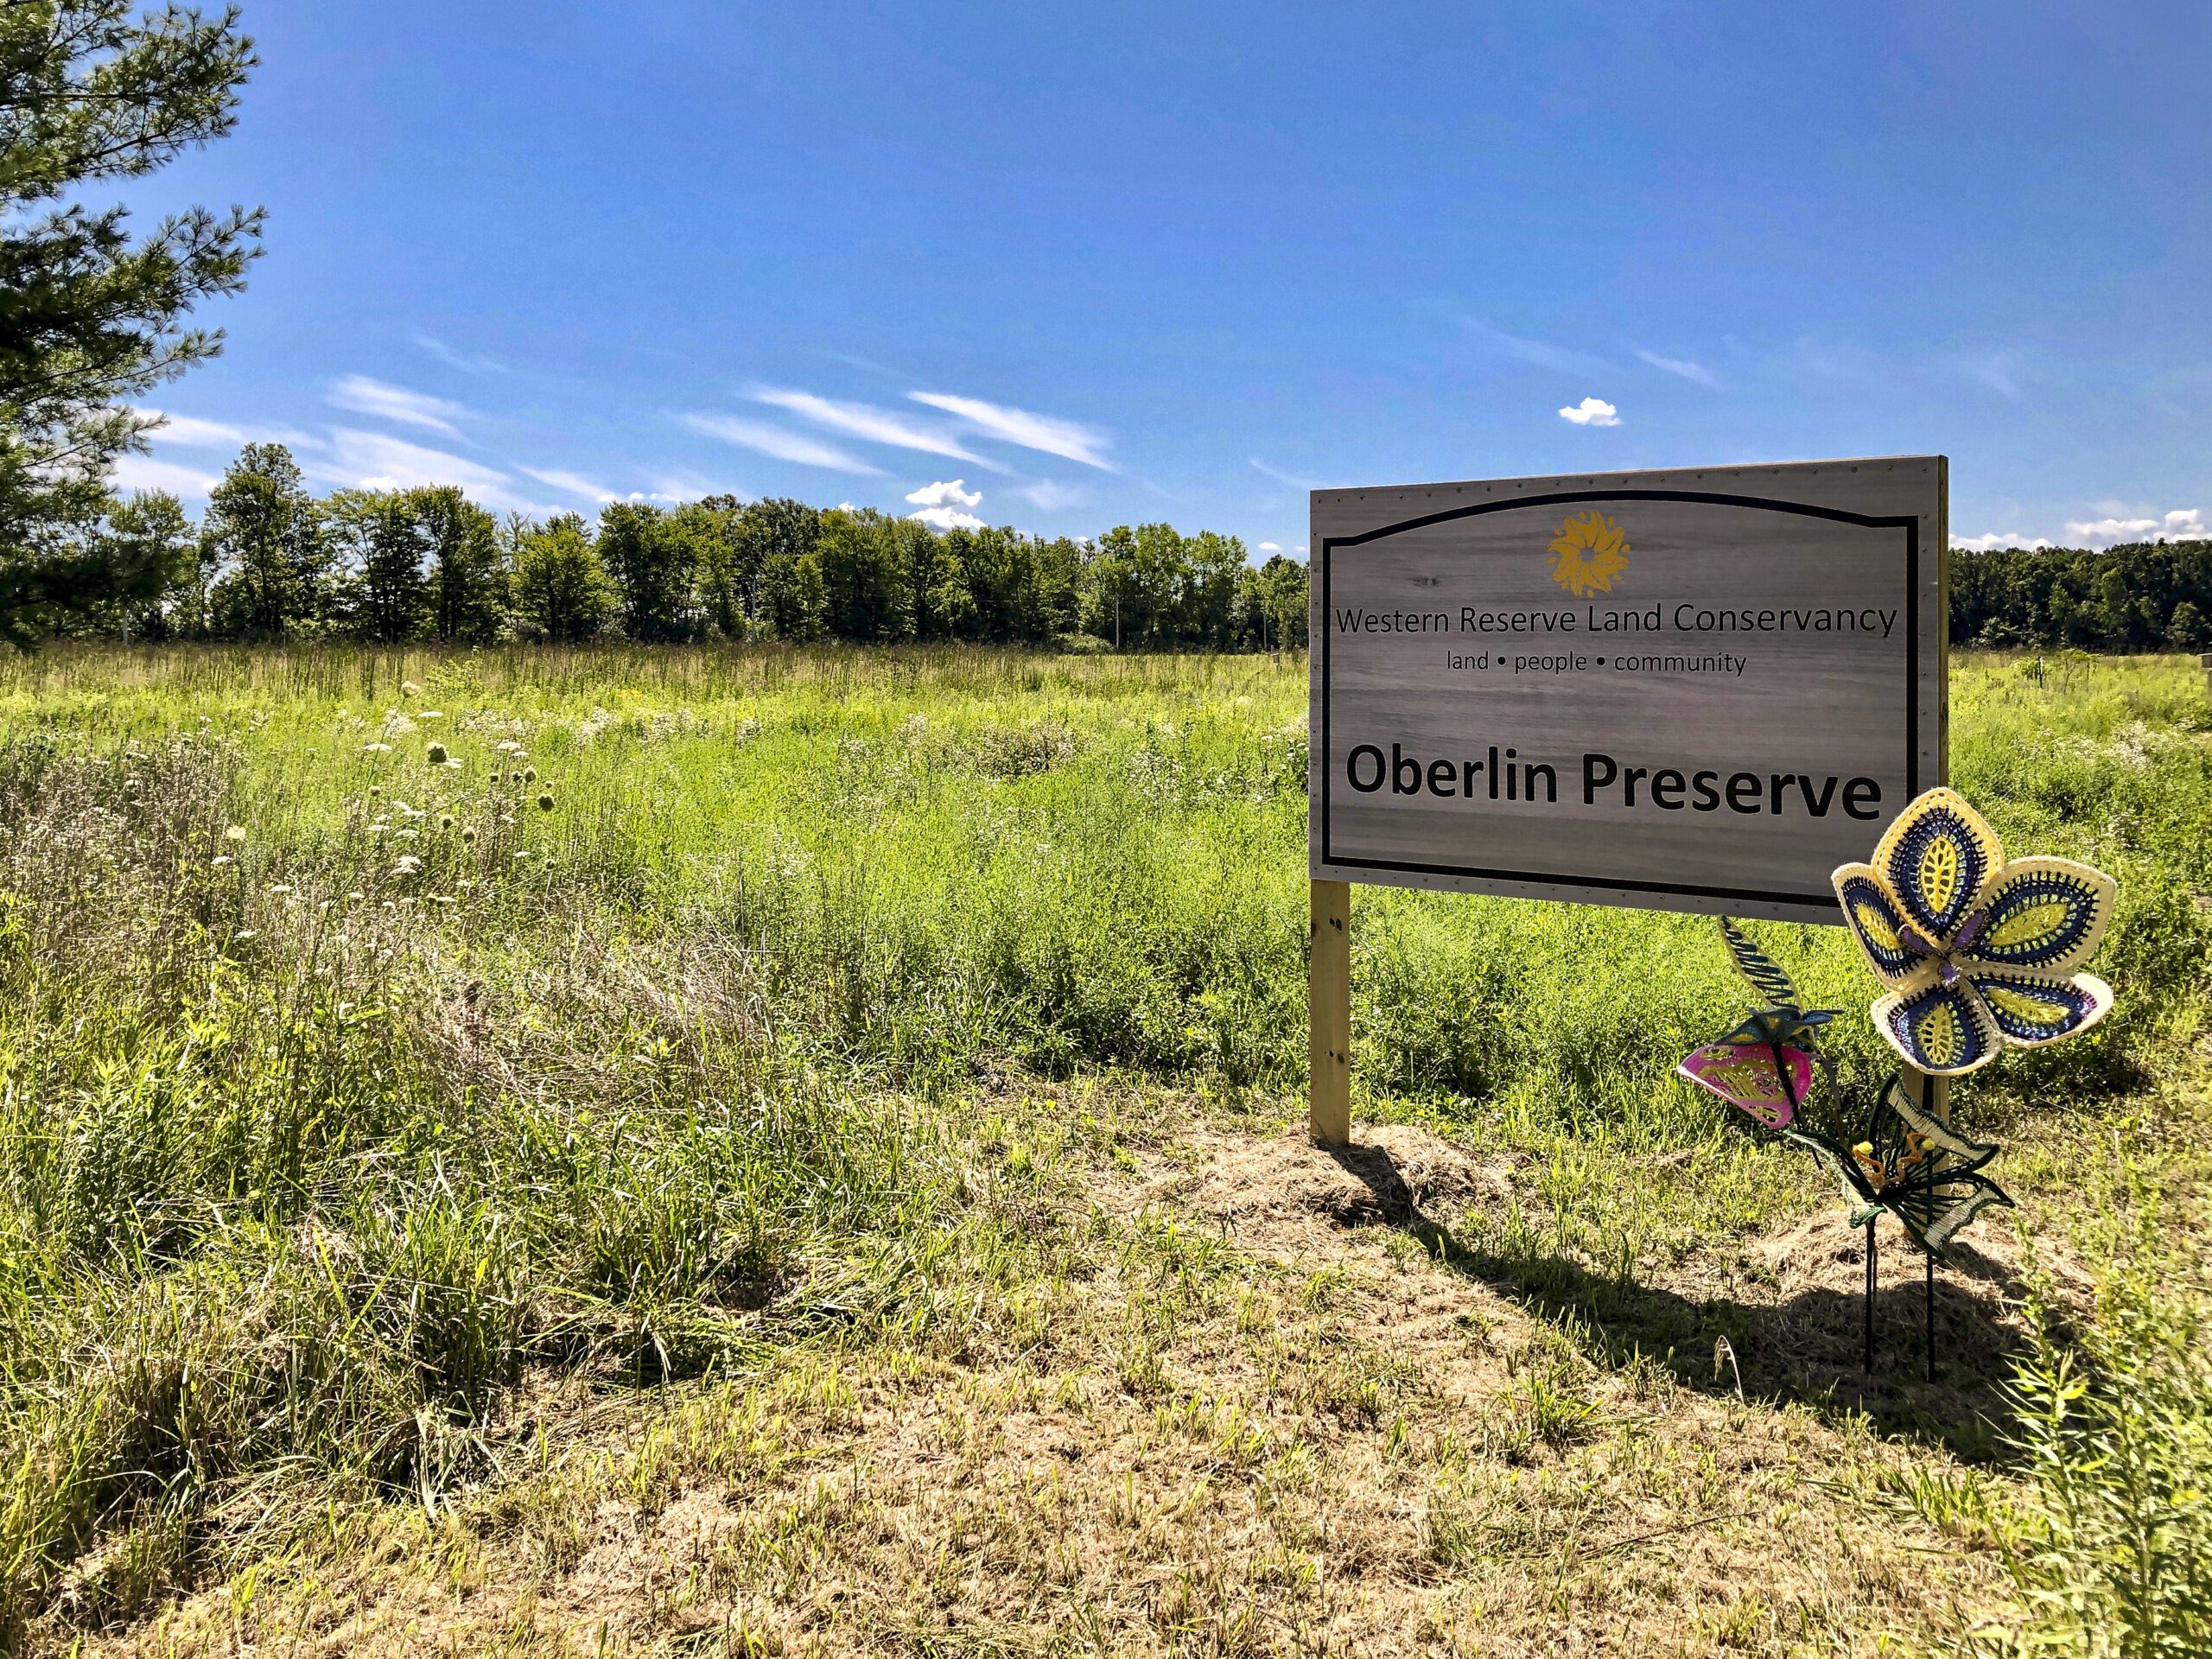 The welcome sign at Oberlin Preserve invites visitors to enjoy the beauty and wonder of nature.